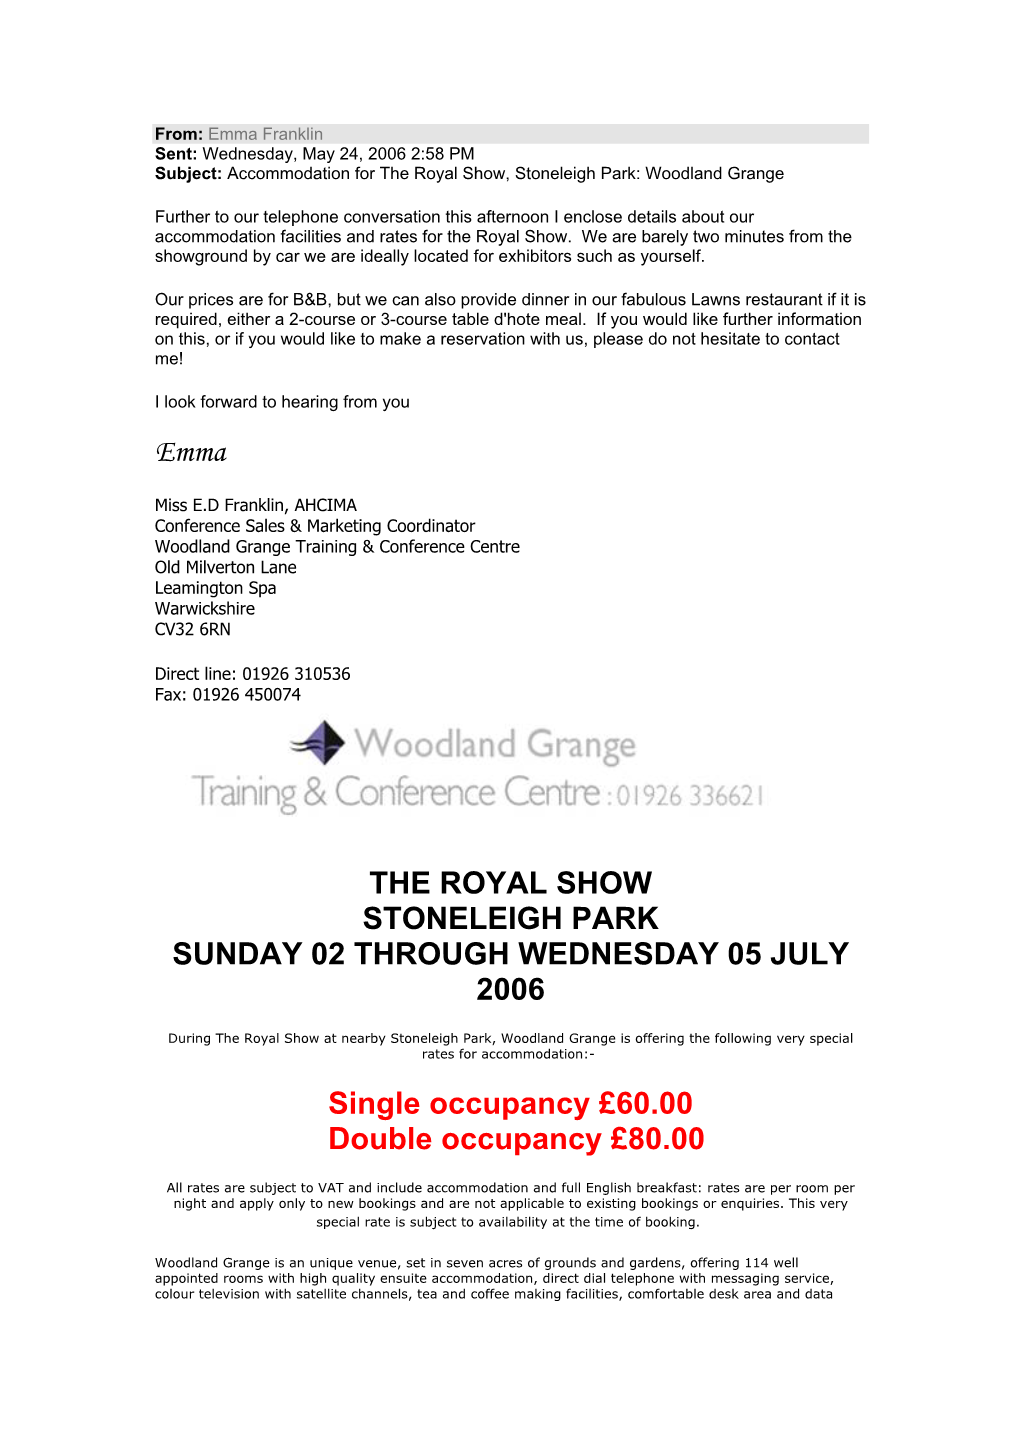 From: Emma Franklin Sent: Wednesday, May 24, 2006 2:58 PM Subject: Accommodation for the Royal Show, Stoneleigh Park: Woodland Grange